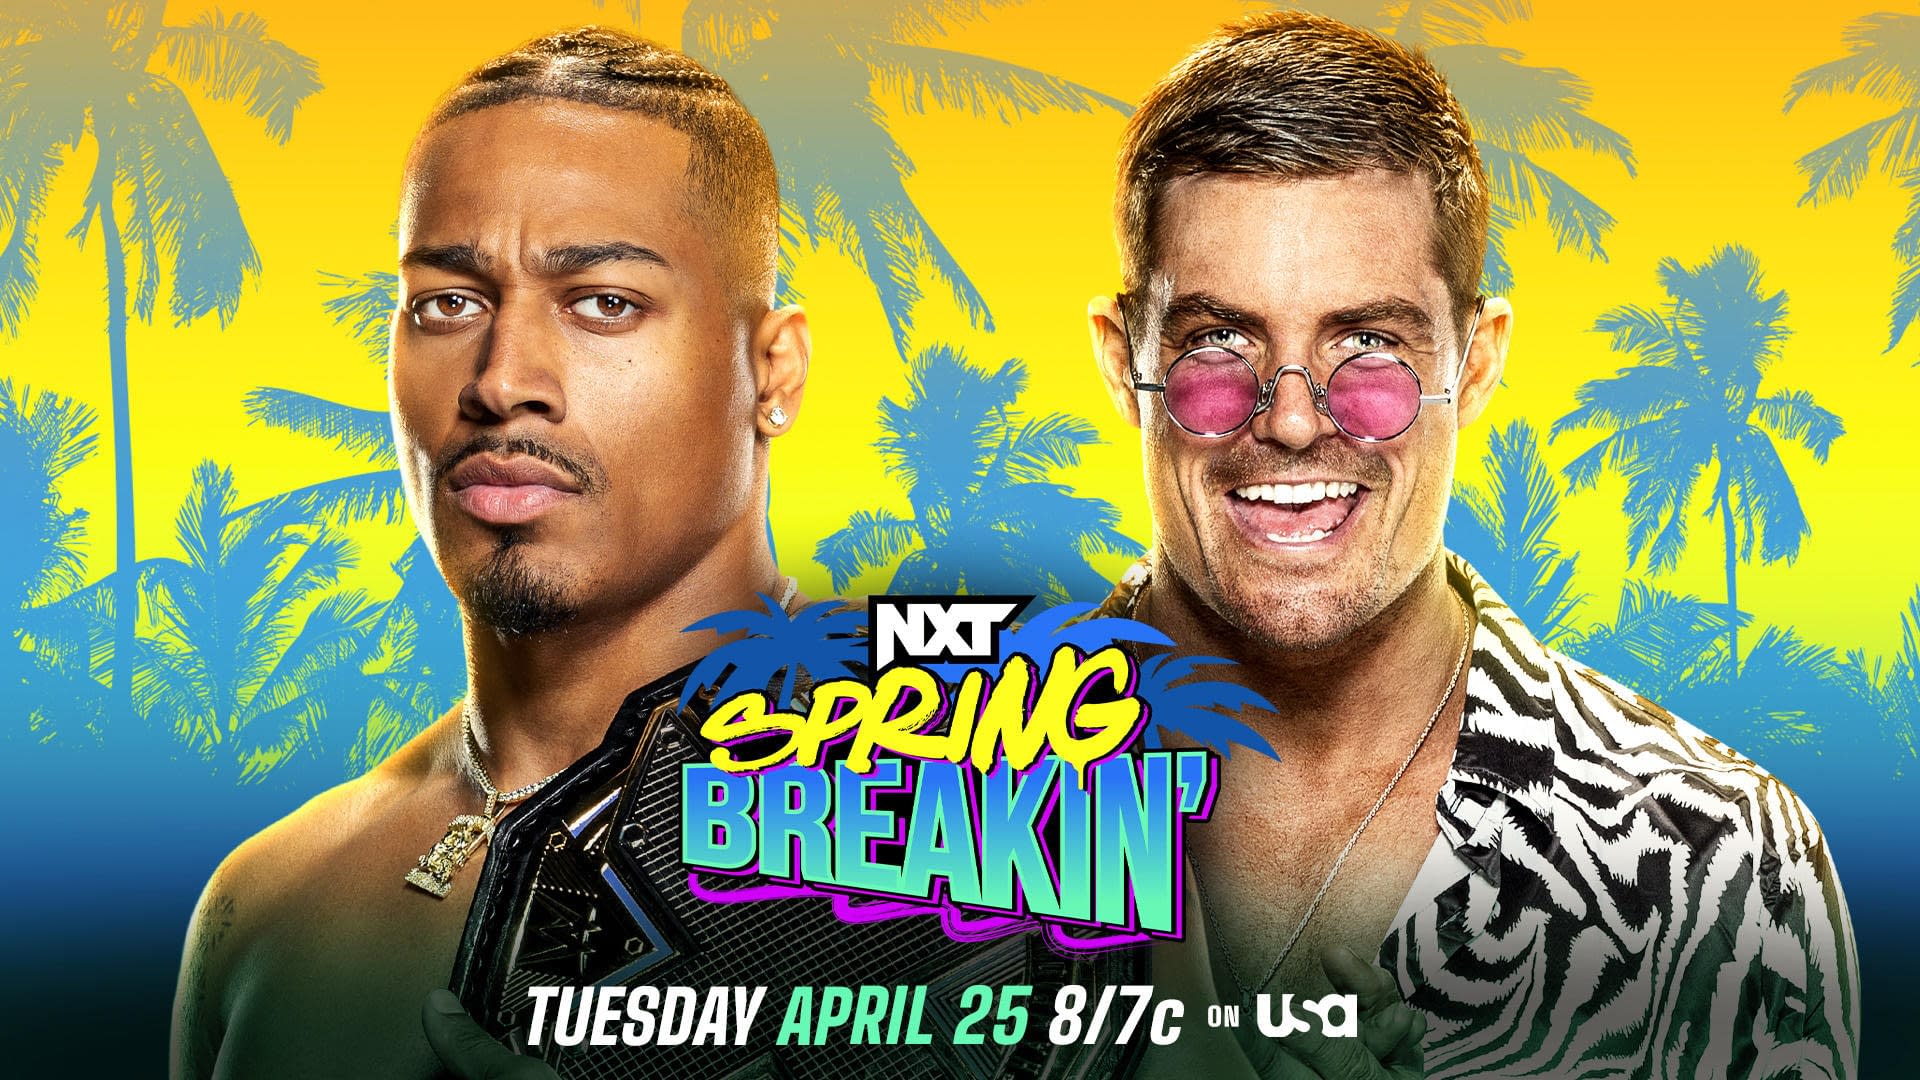 NXT Spring Breakin' Preview Can Grayson Waller Win The Big One?